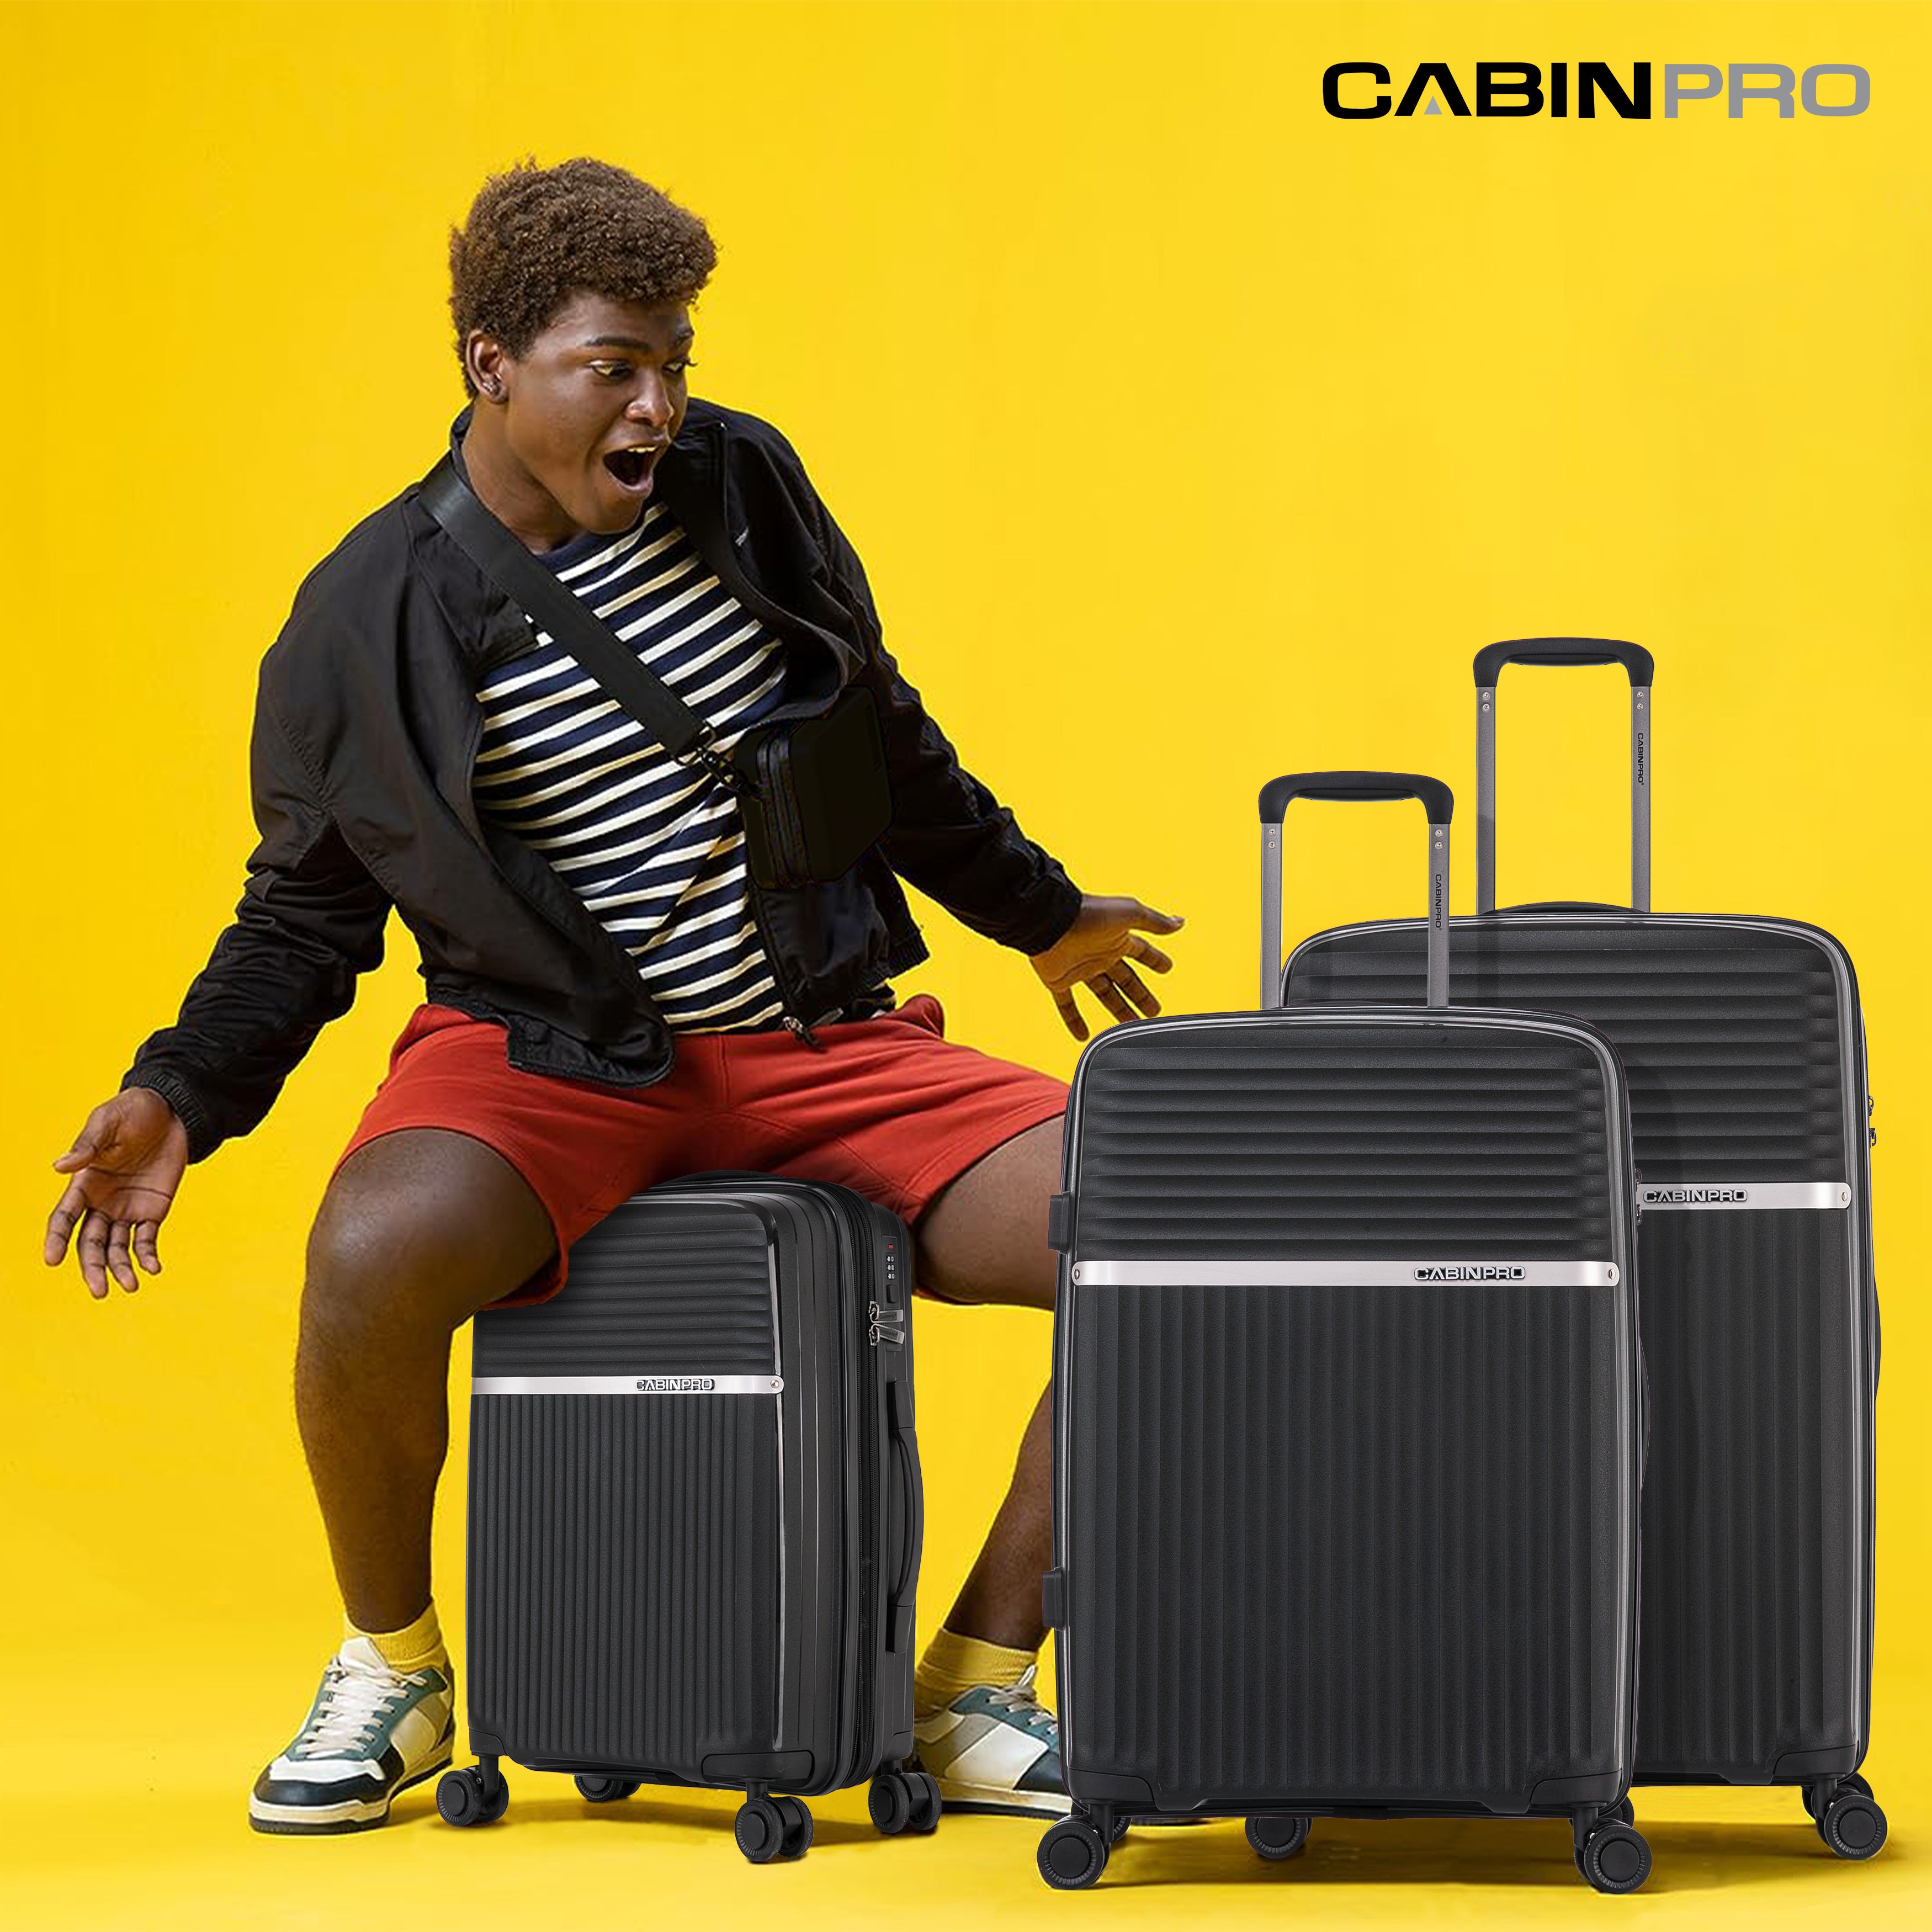 CabinPro Unisex Hard Case Suitcase Expandable PP Fashion Trolley Luggage Set with 4 Quite 360° Double Spinner Wheels, CP002-3